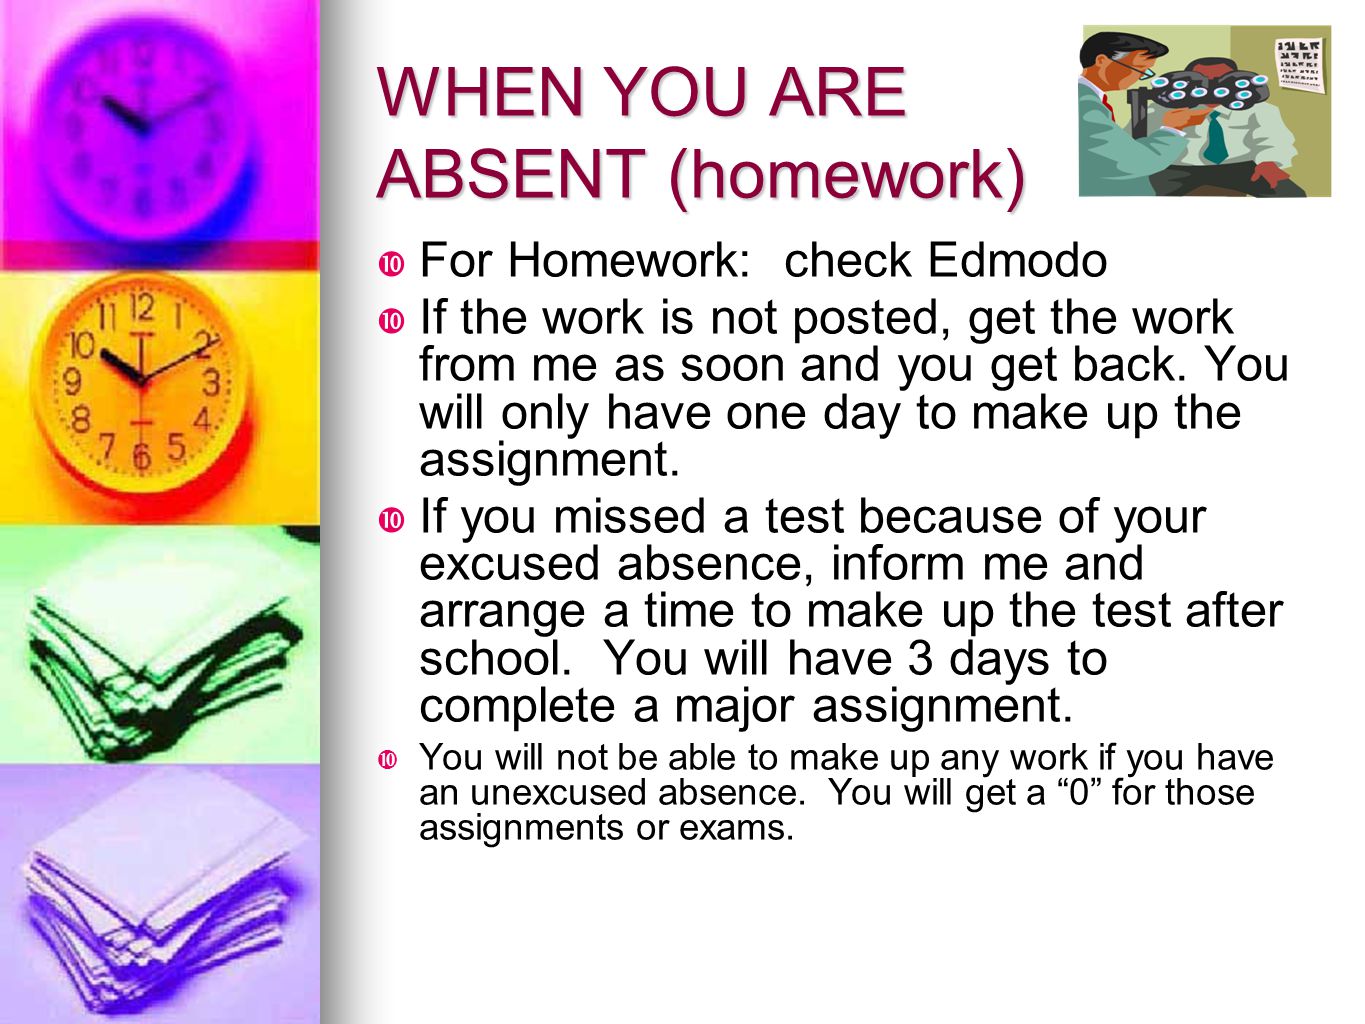 WHEN YOU ARE ABSENT (homework)